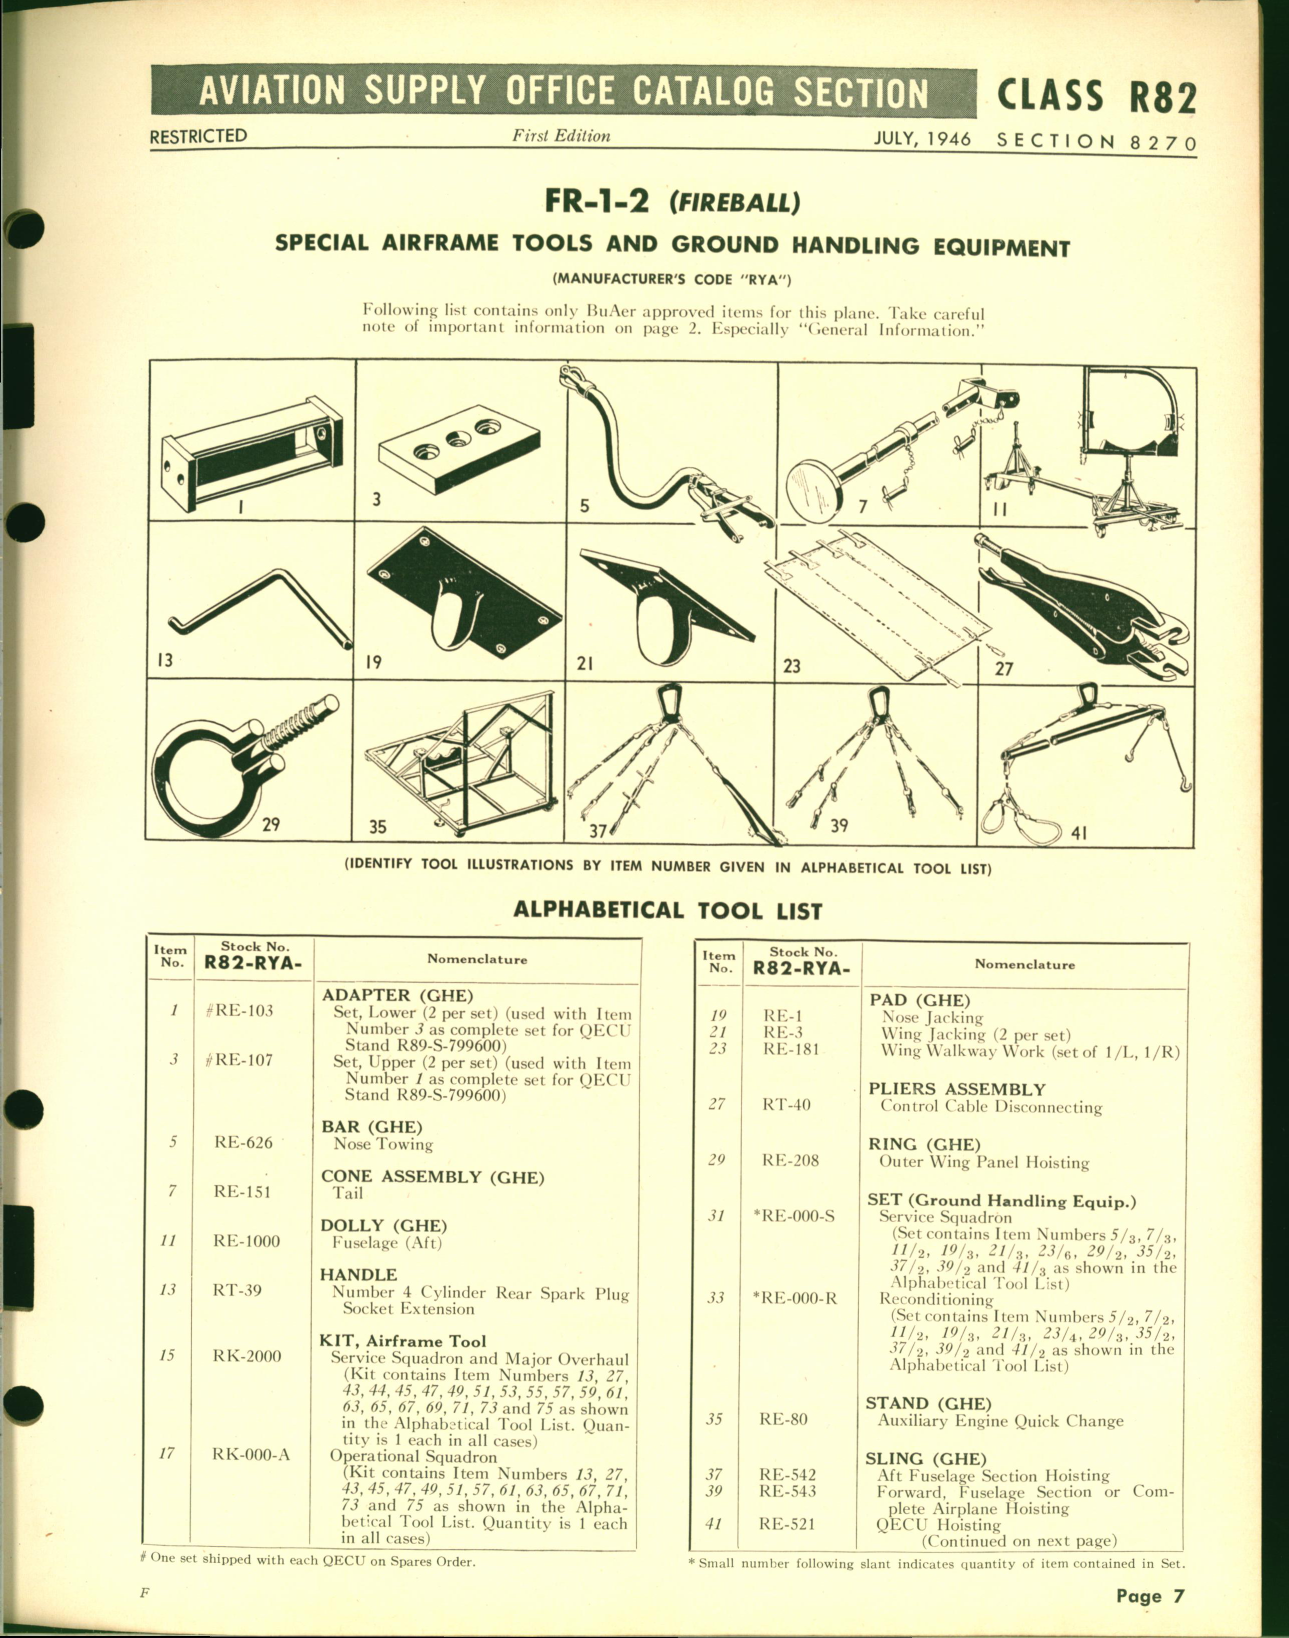 Sample page 7 from AirCorps Library document: Special Airframe tools and Ground Handling Equipment